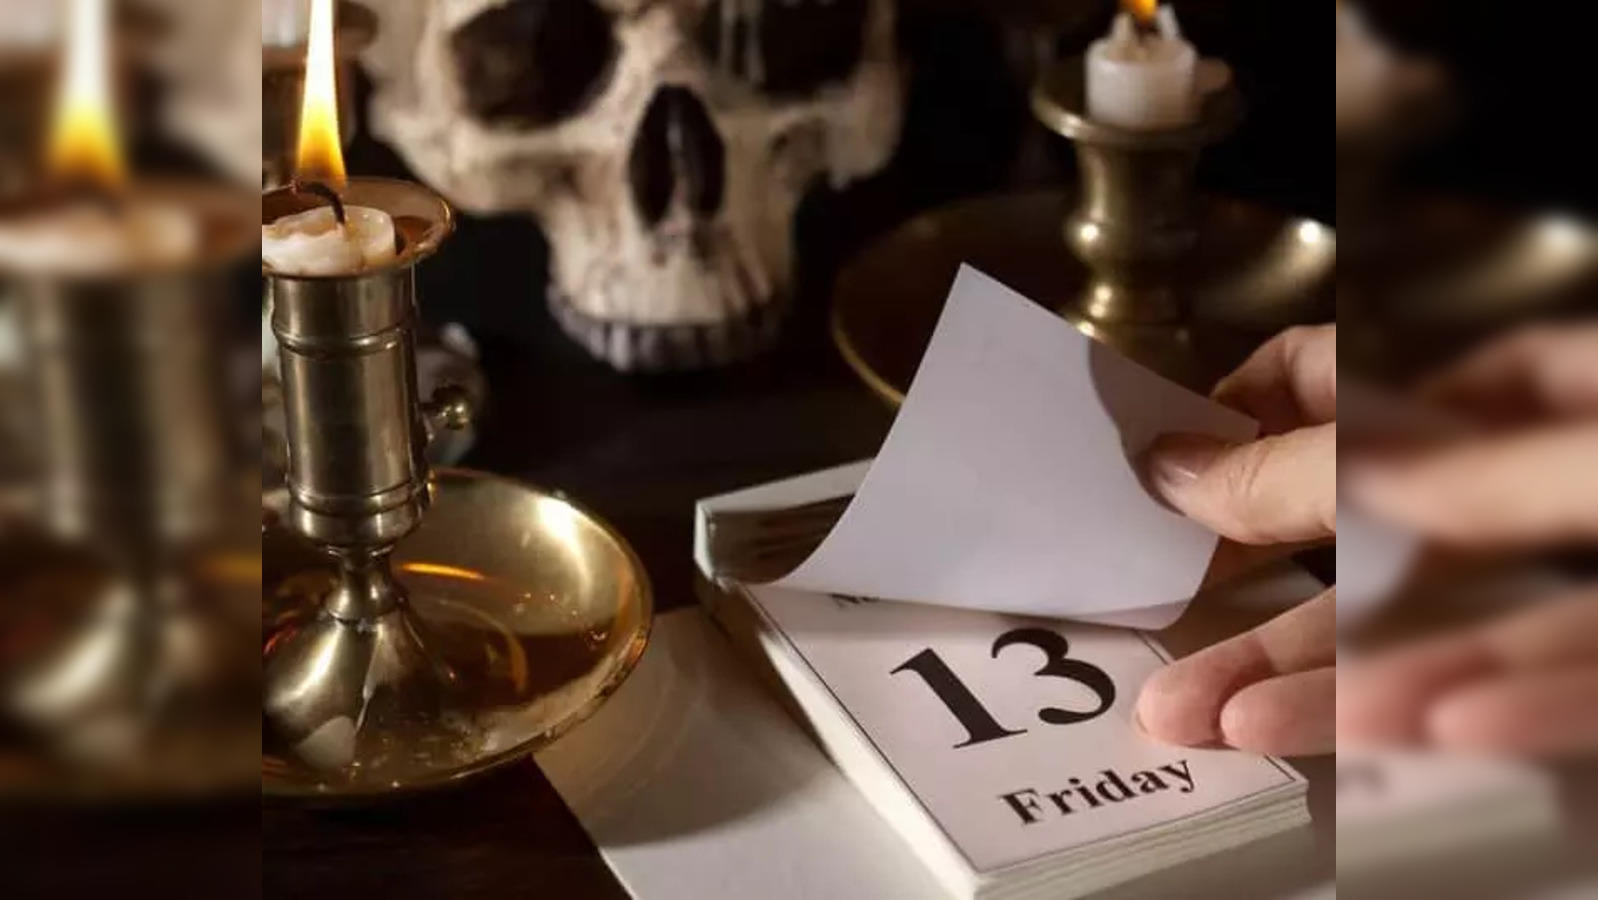 Friday the 13th Website